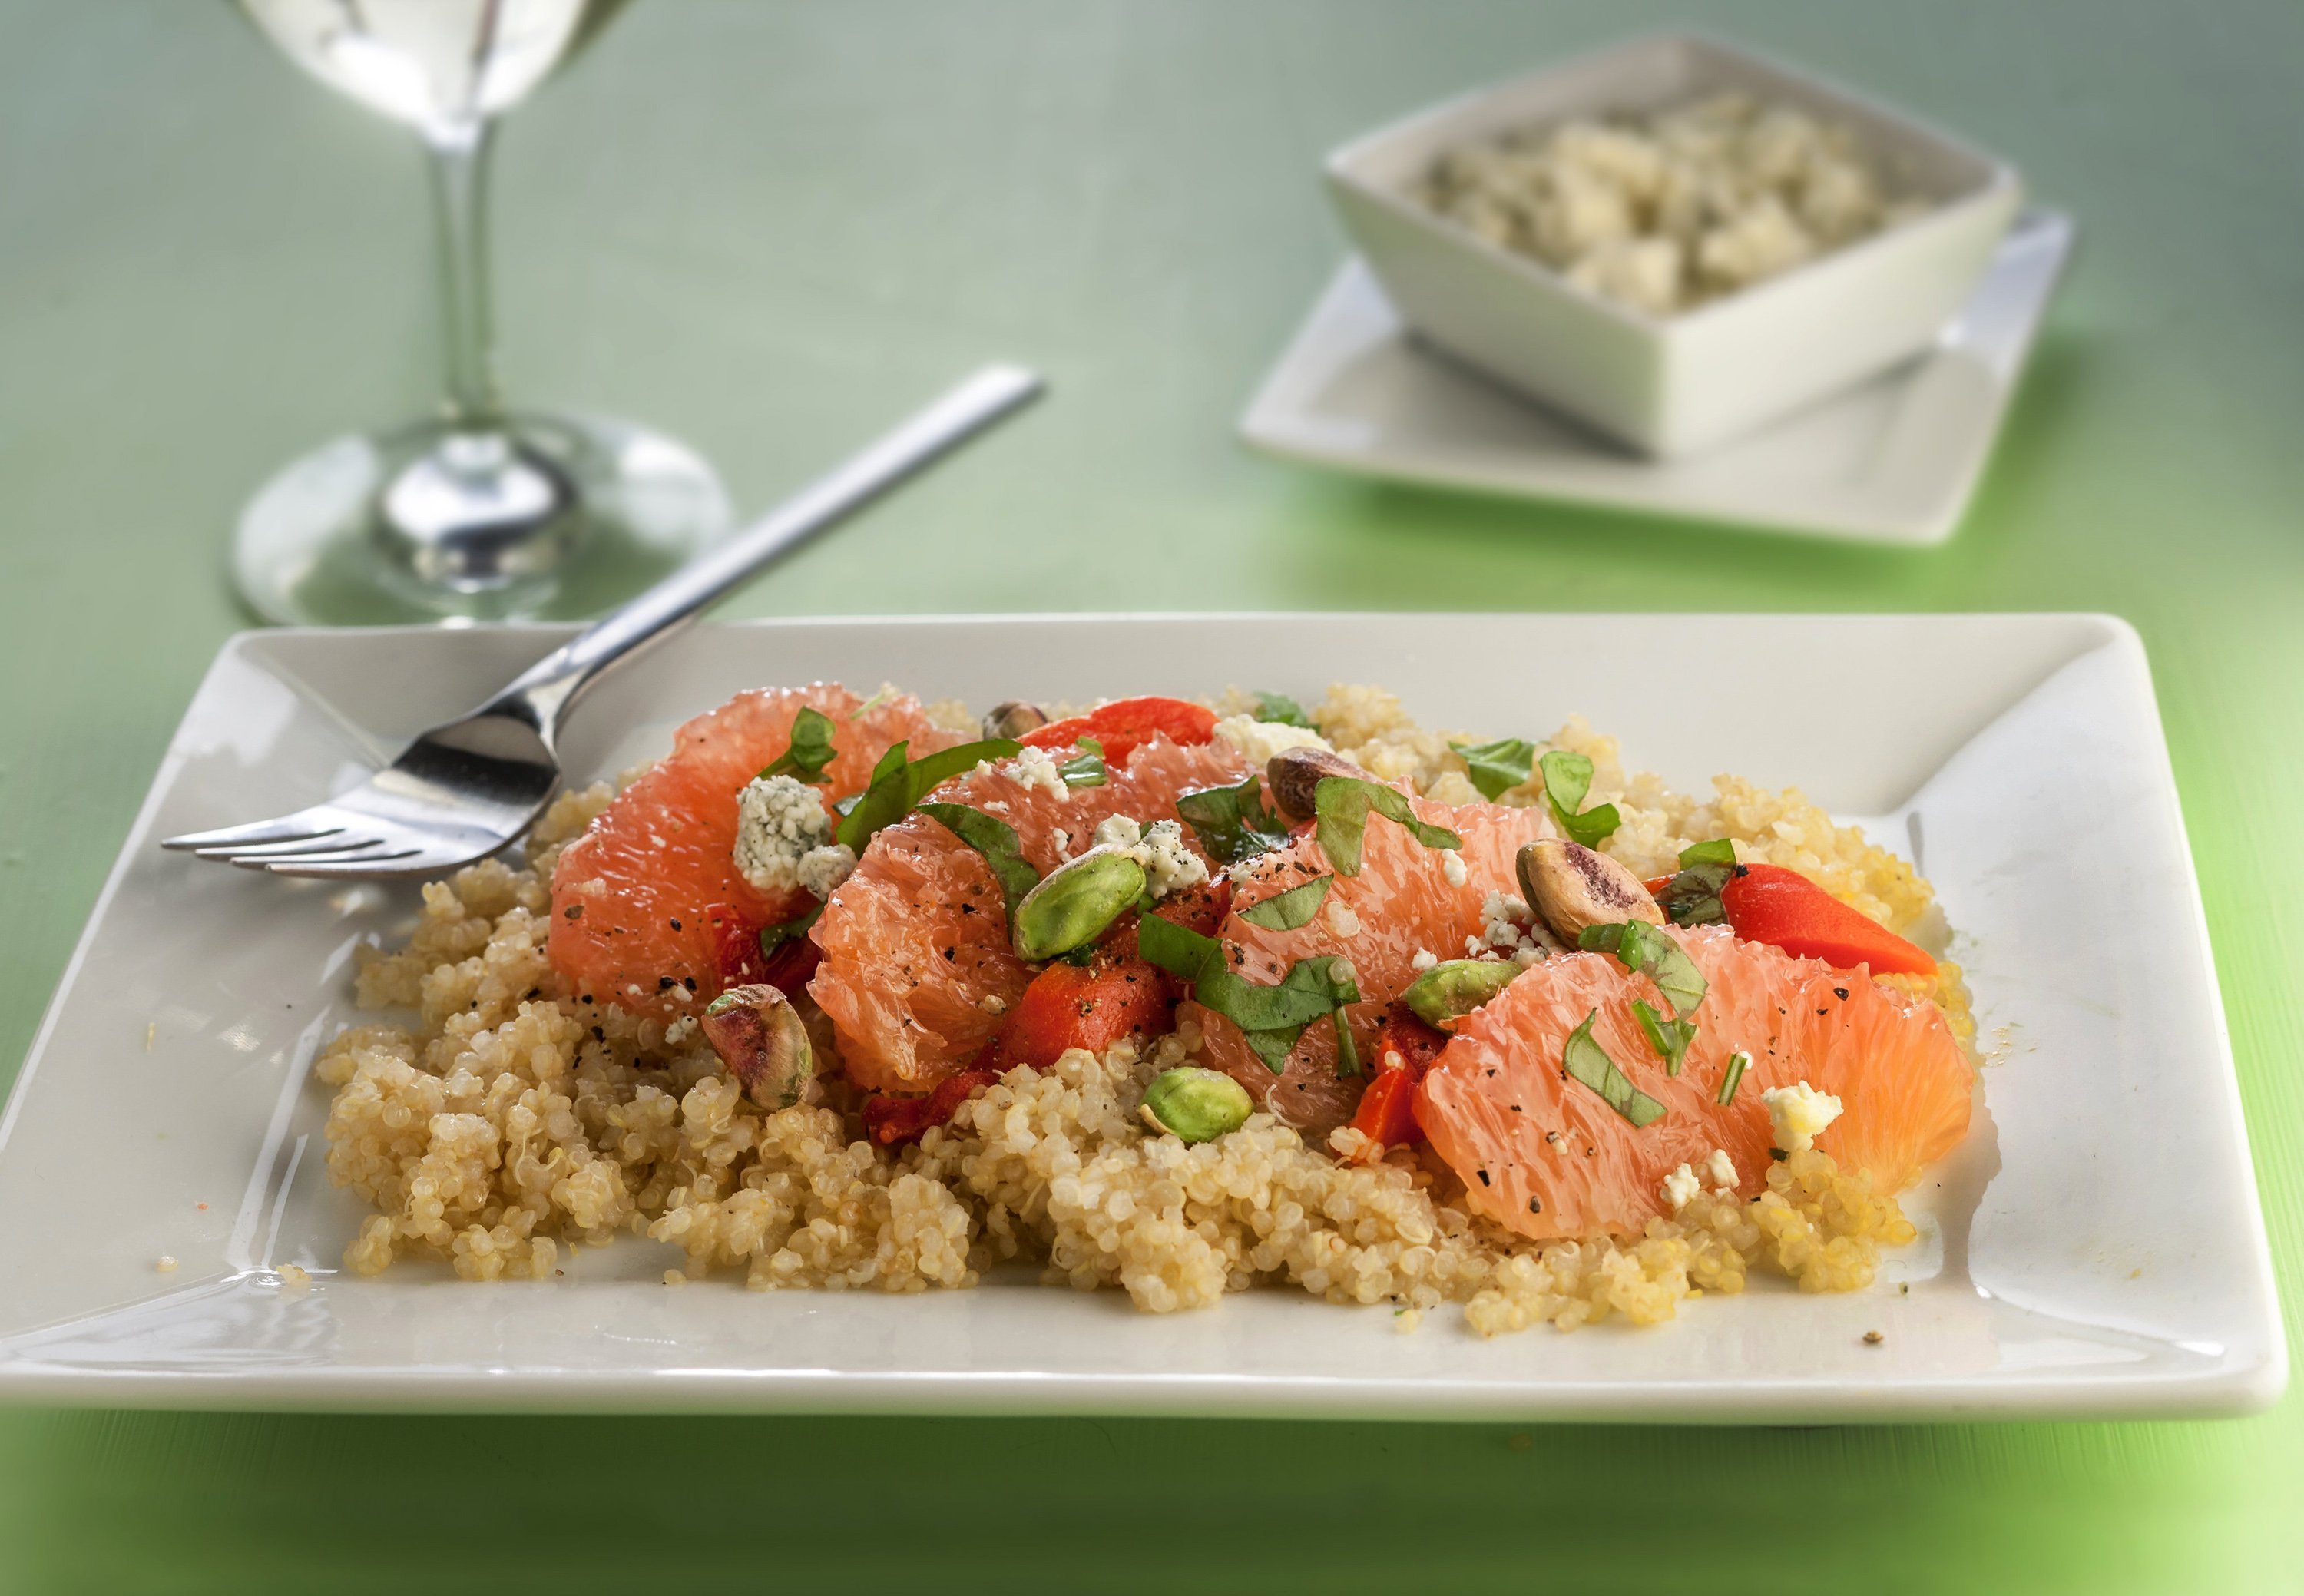 Grapefruit, red bell pepper and grains combine in a delicious salad.